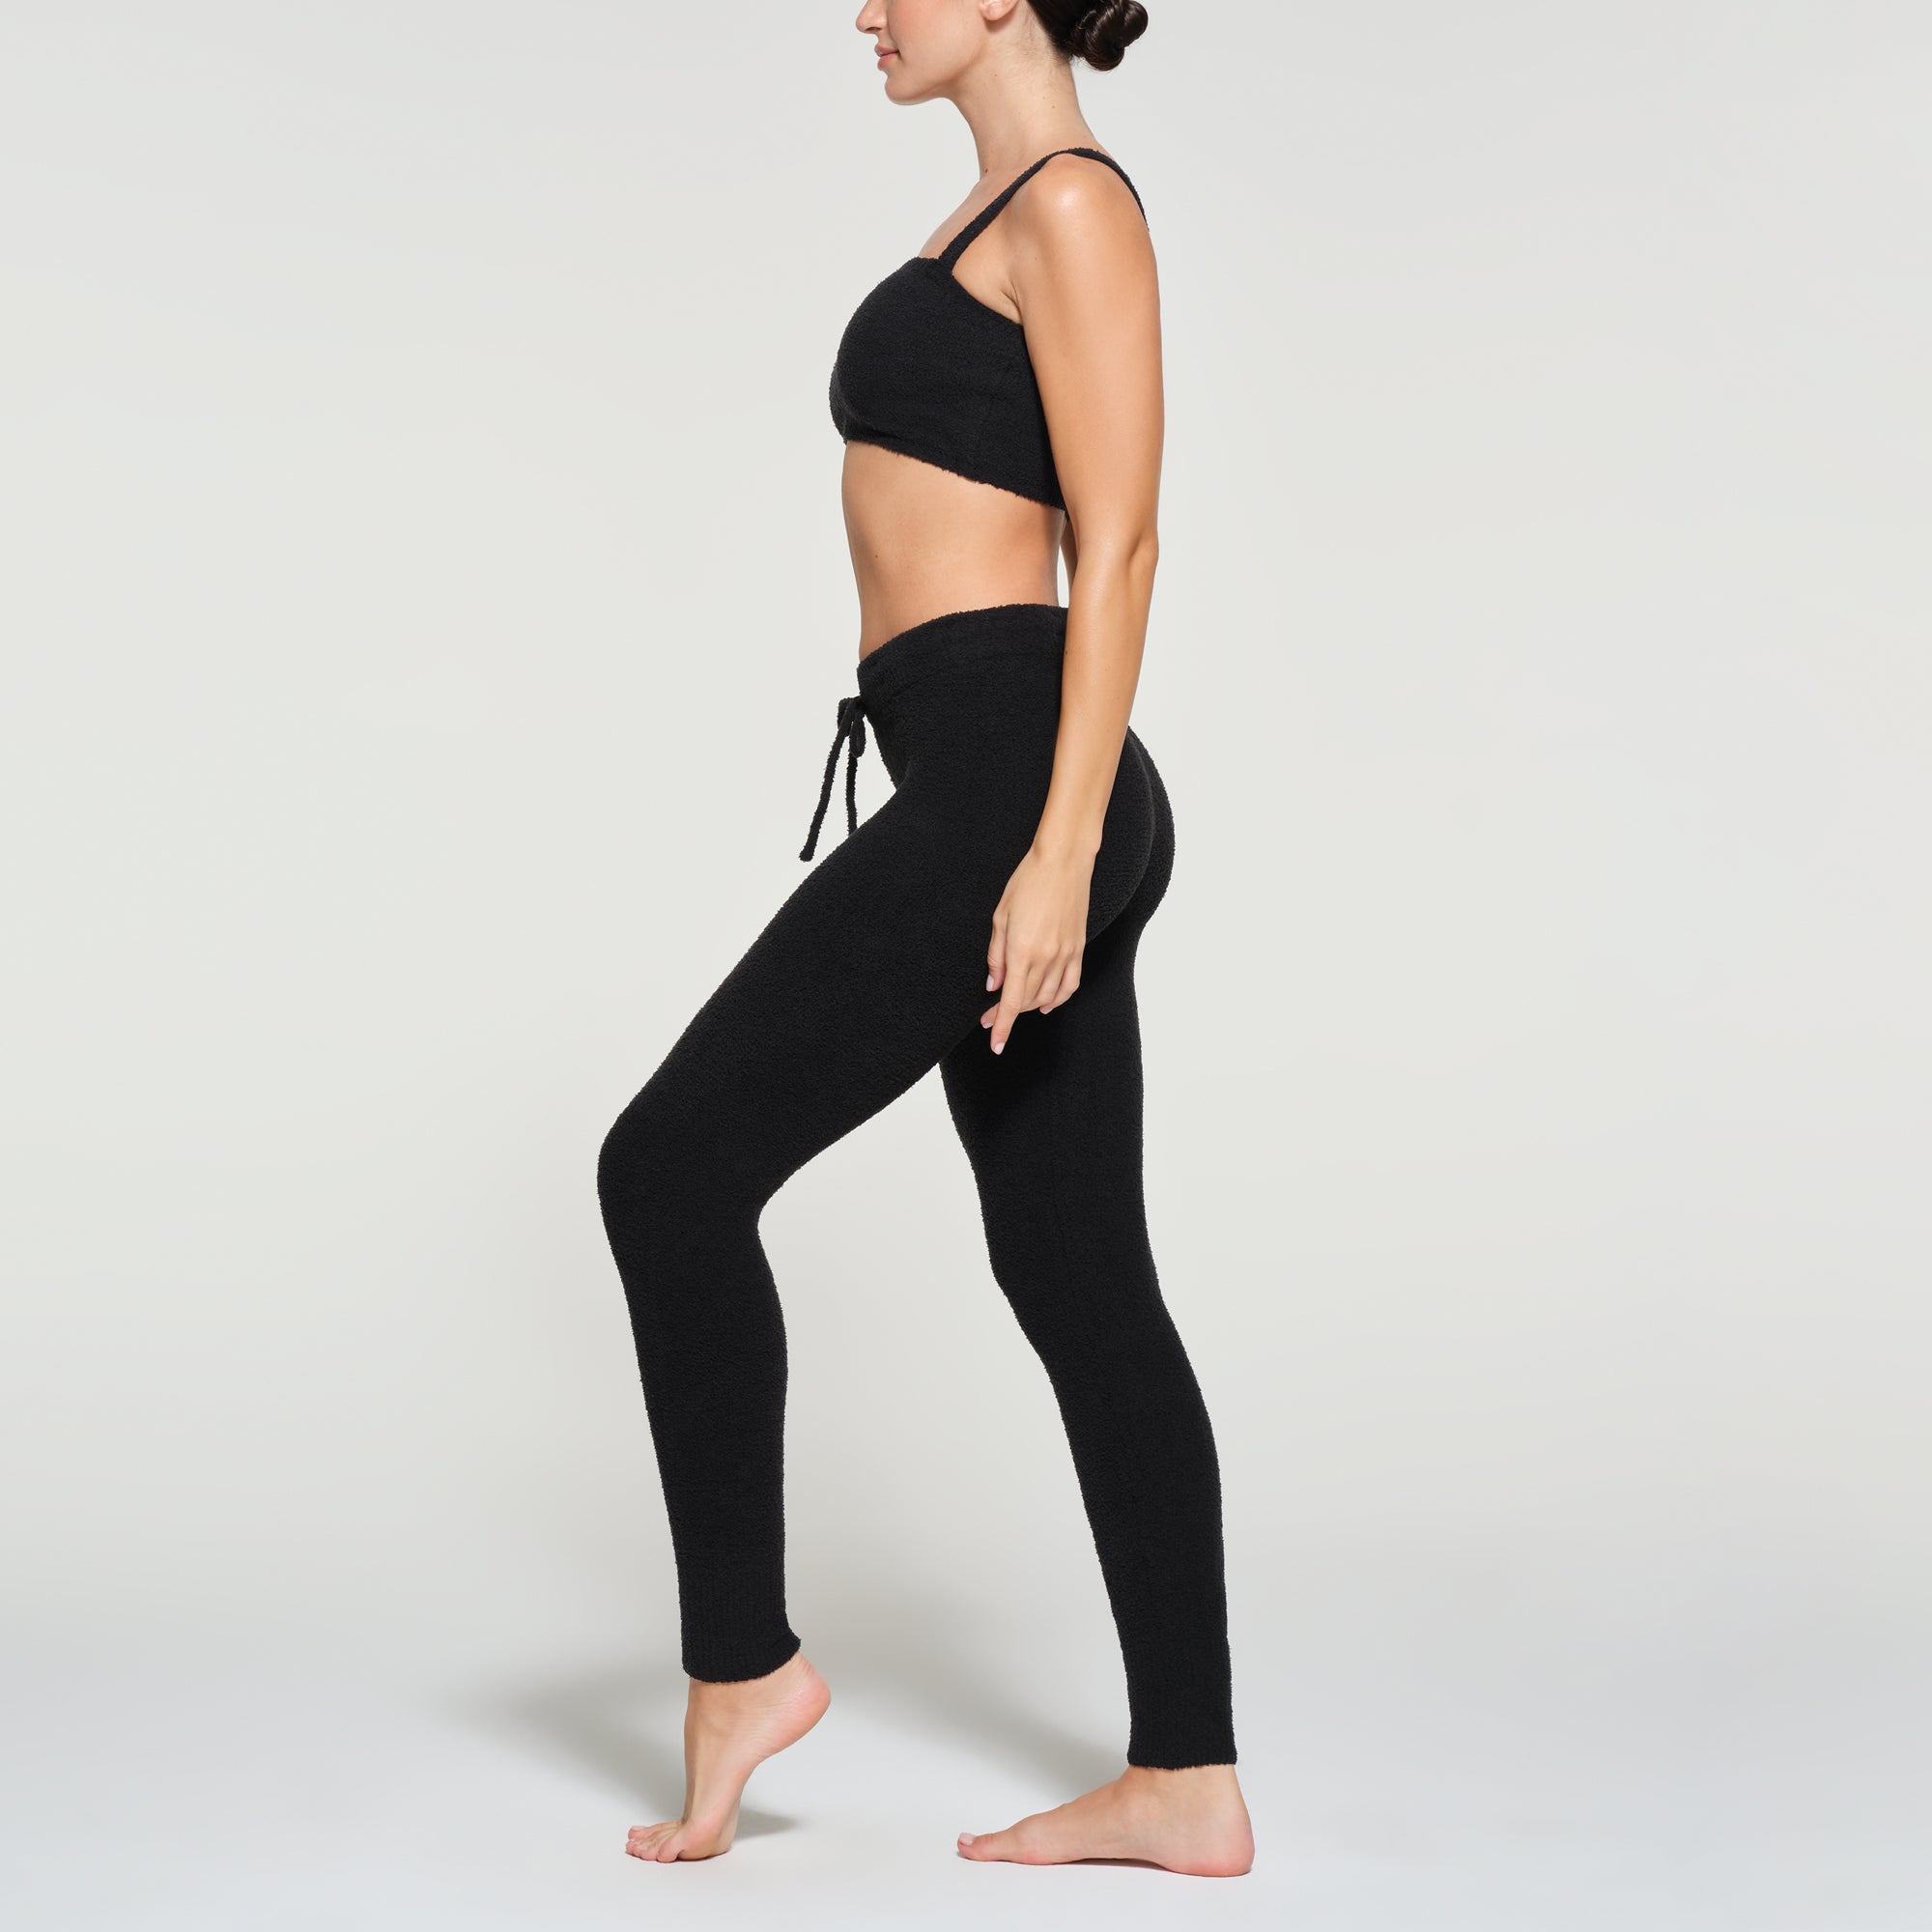 Skims Stretch Vinyl Legging In Stock Availability and Price Tracking